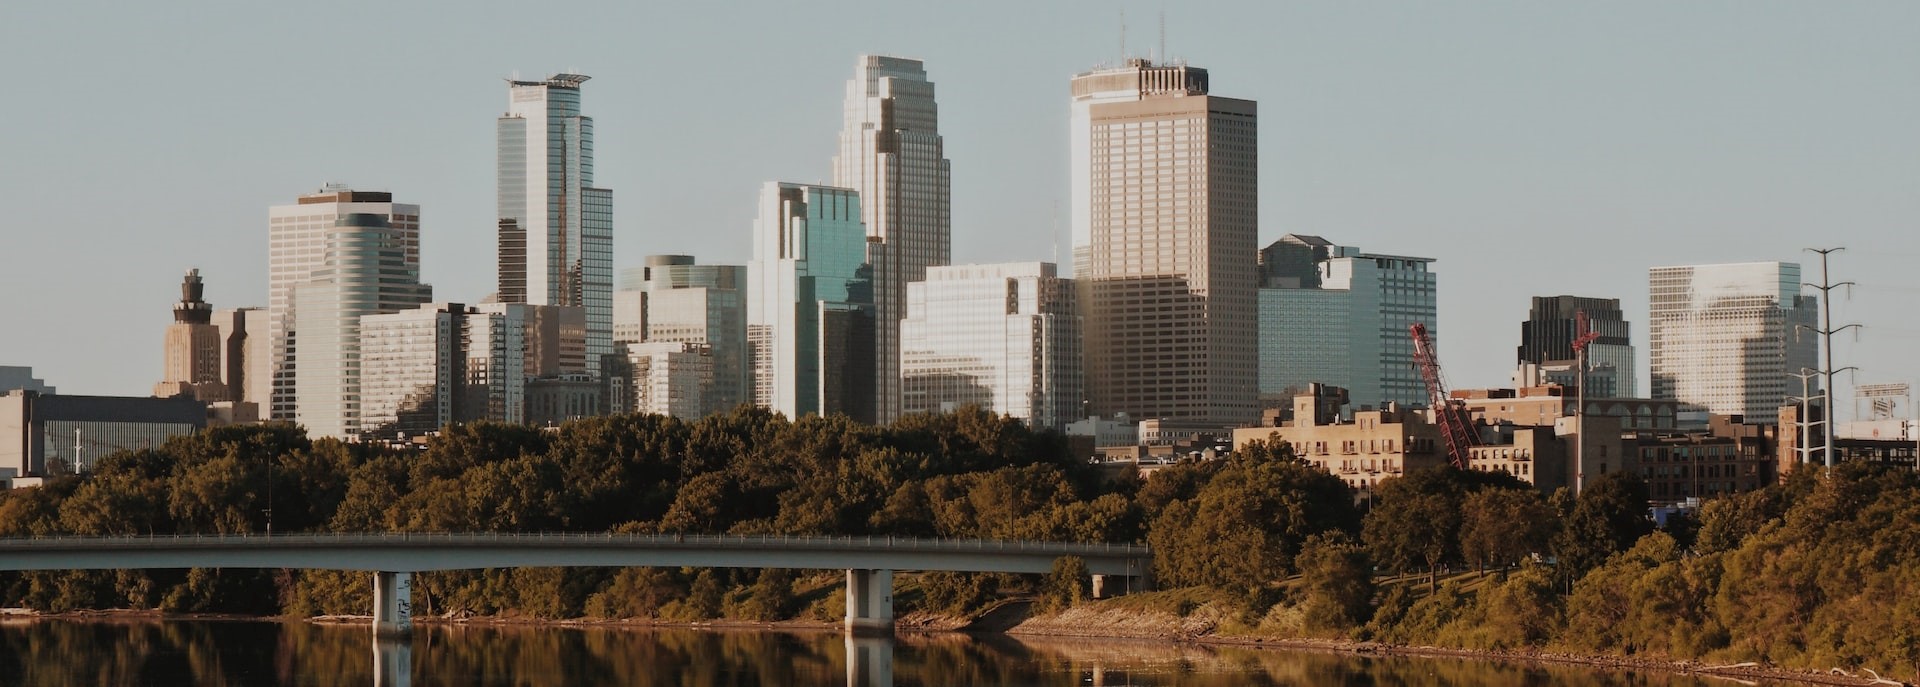 Minneapolis skyline reflecting off the Mississippi River | Breast Cancer Car Donations